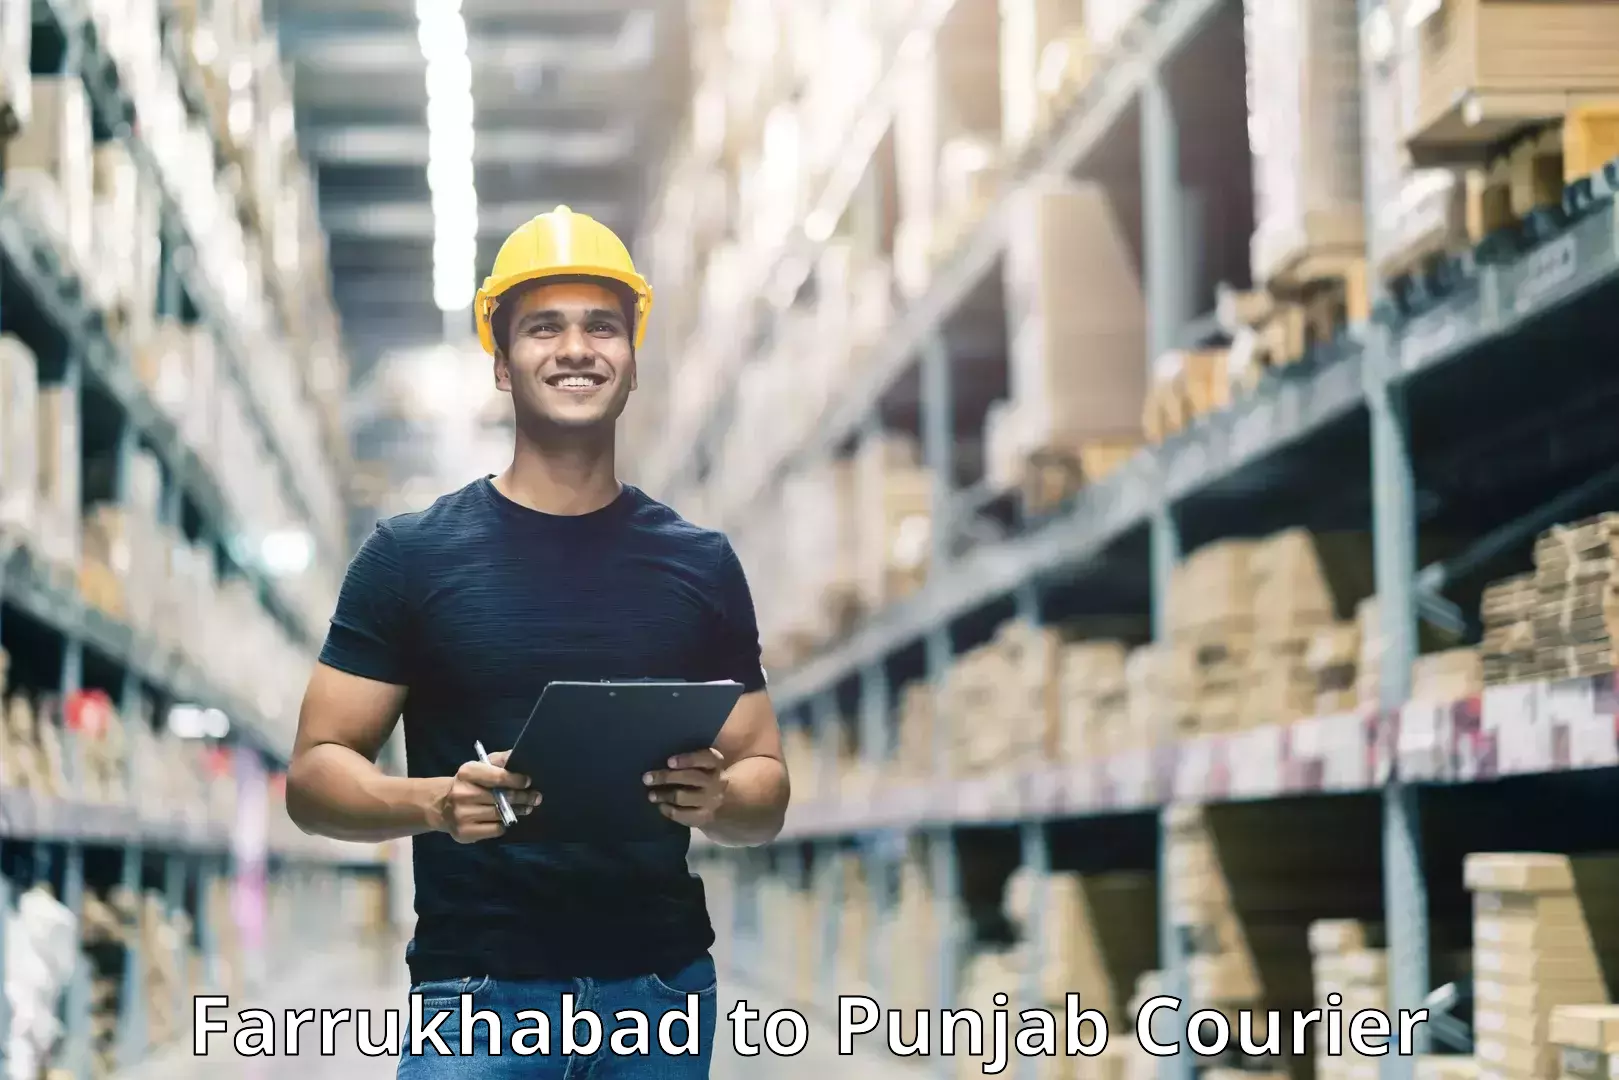 User-friendly delivery service in Farrukhabad to Punjab